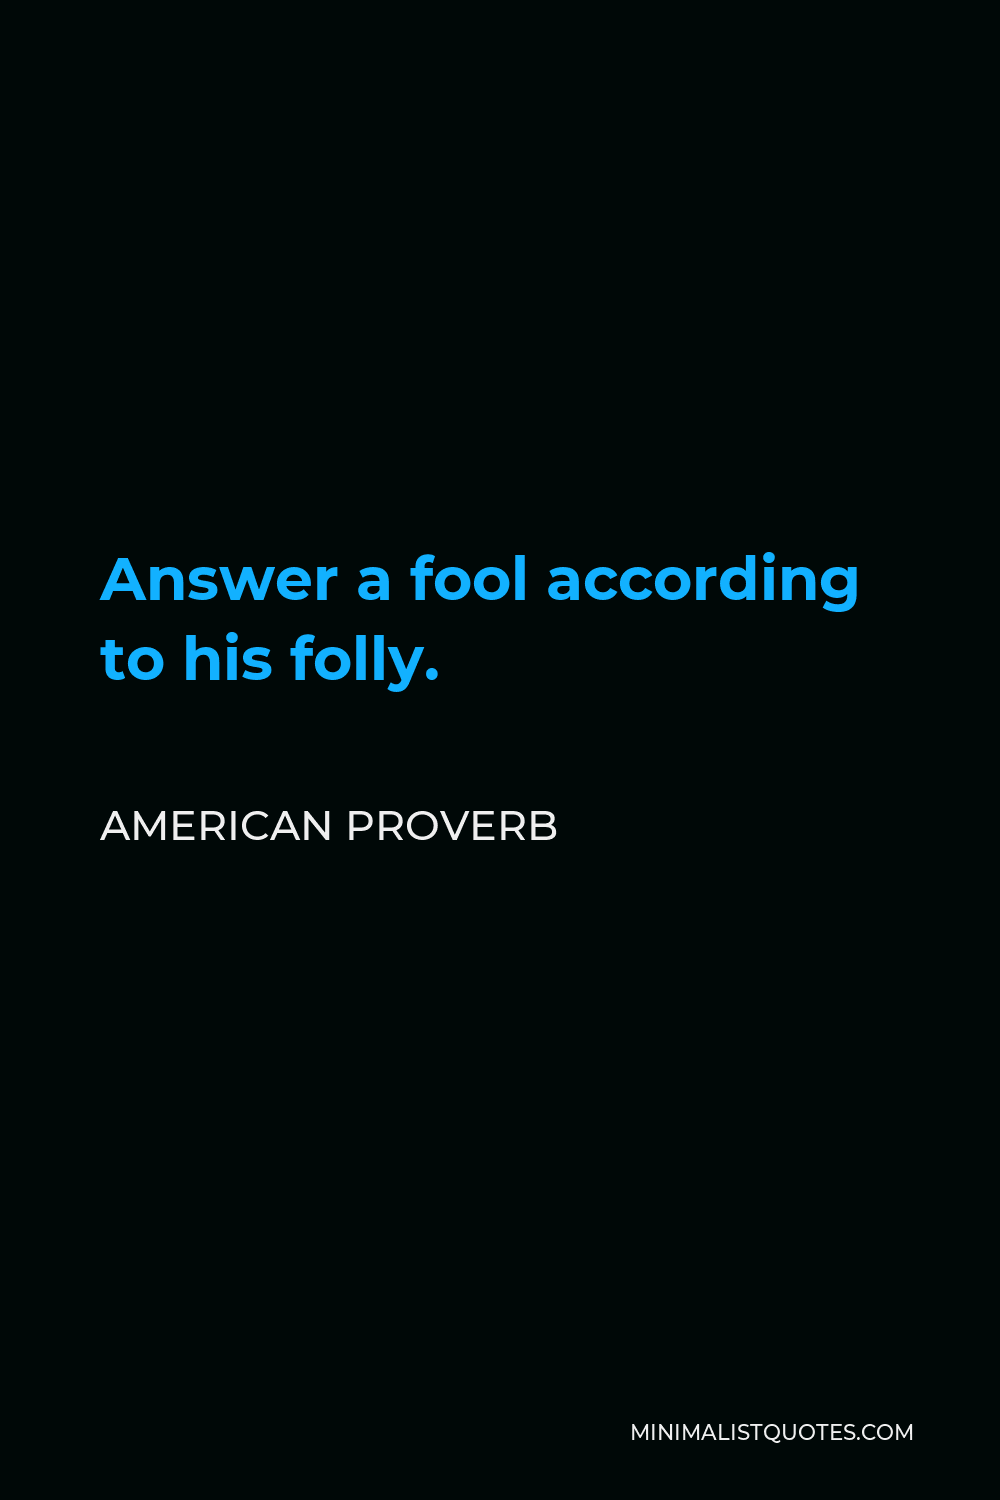 American Proverb Quote - Answer a fool according to his folly.